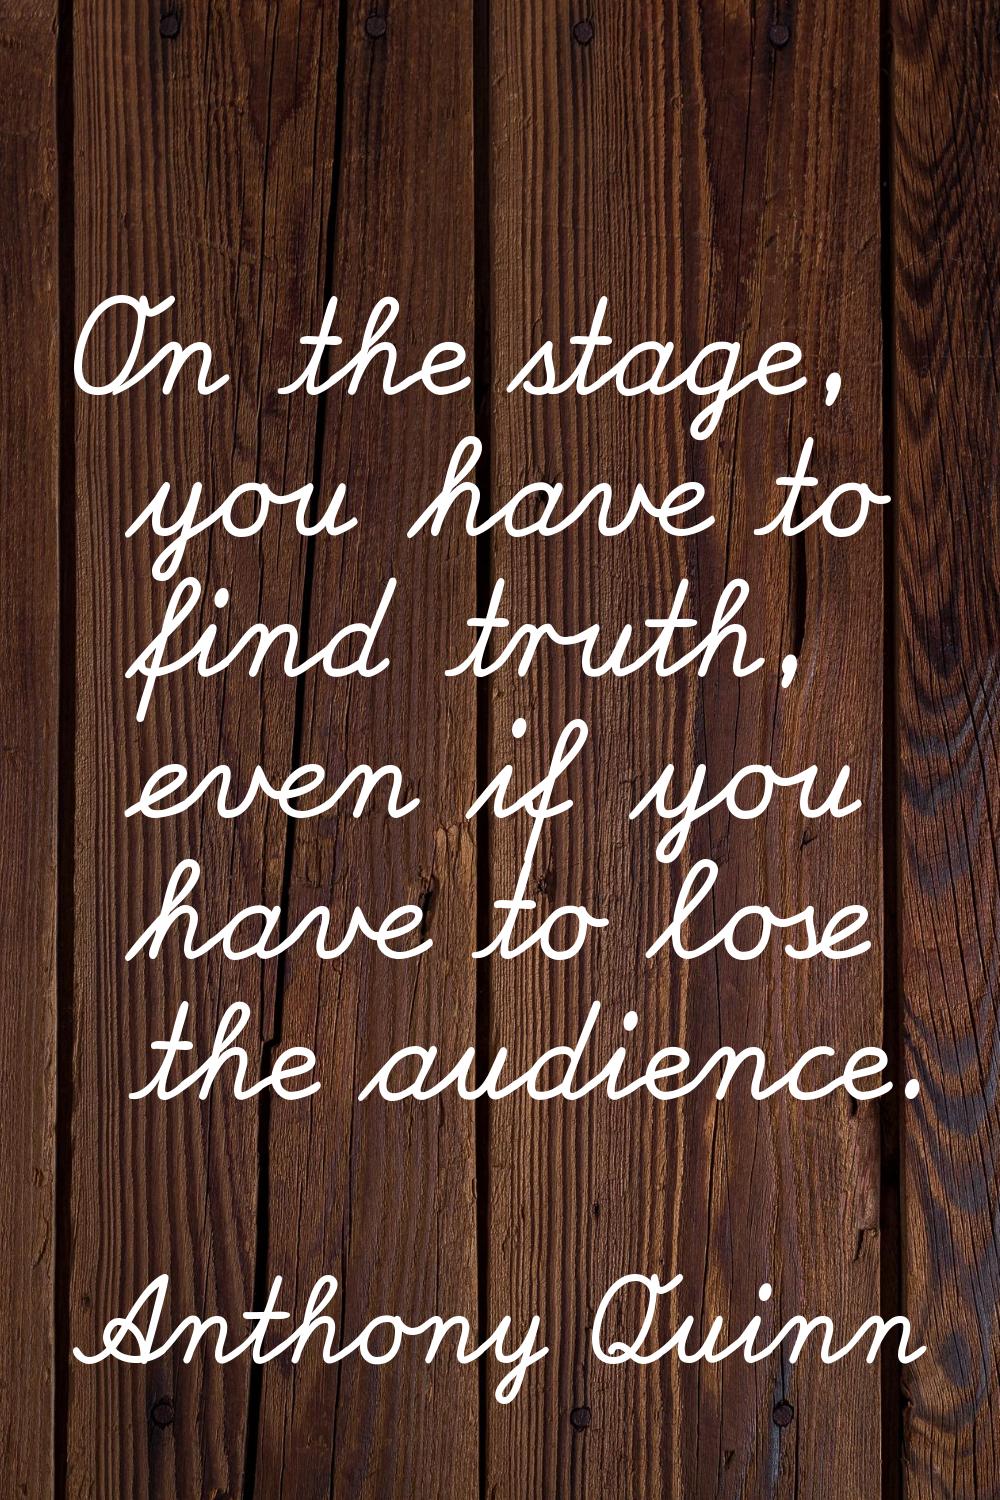 On the stage, you have to find truth, even if you have to lose the audience.